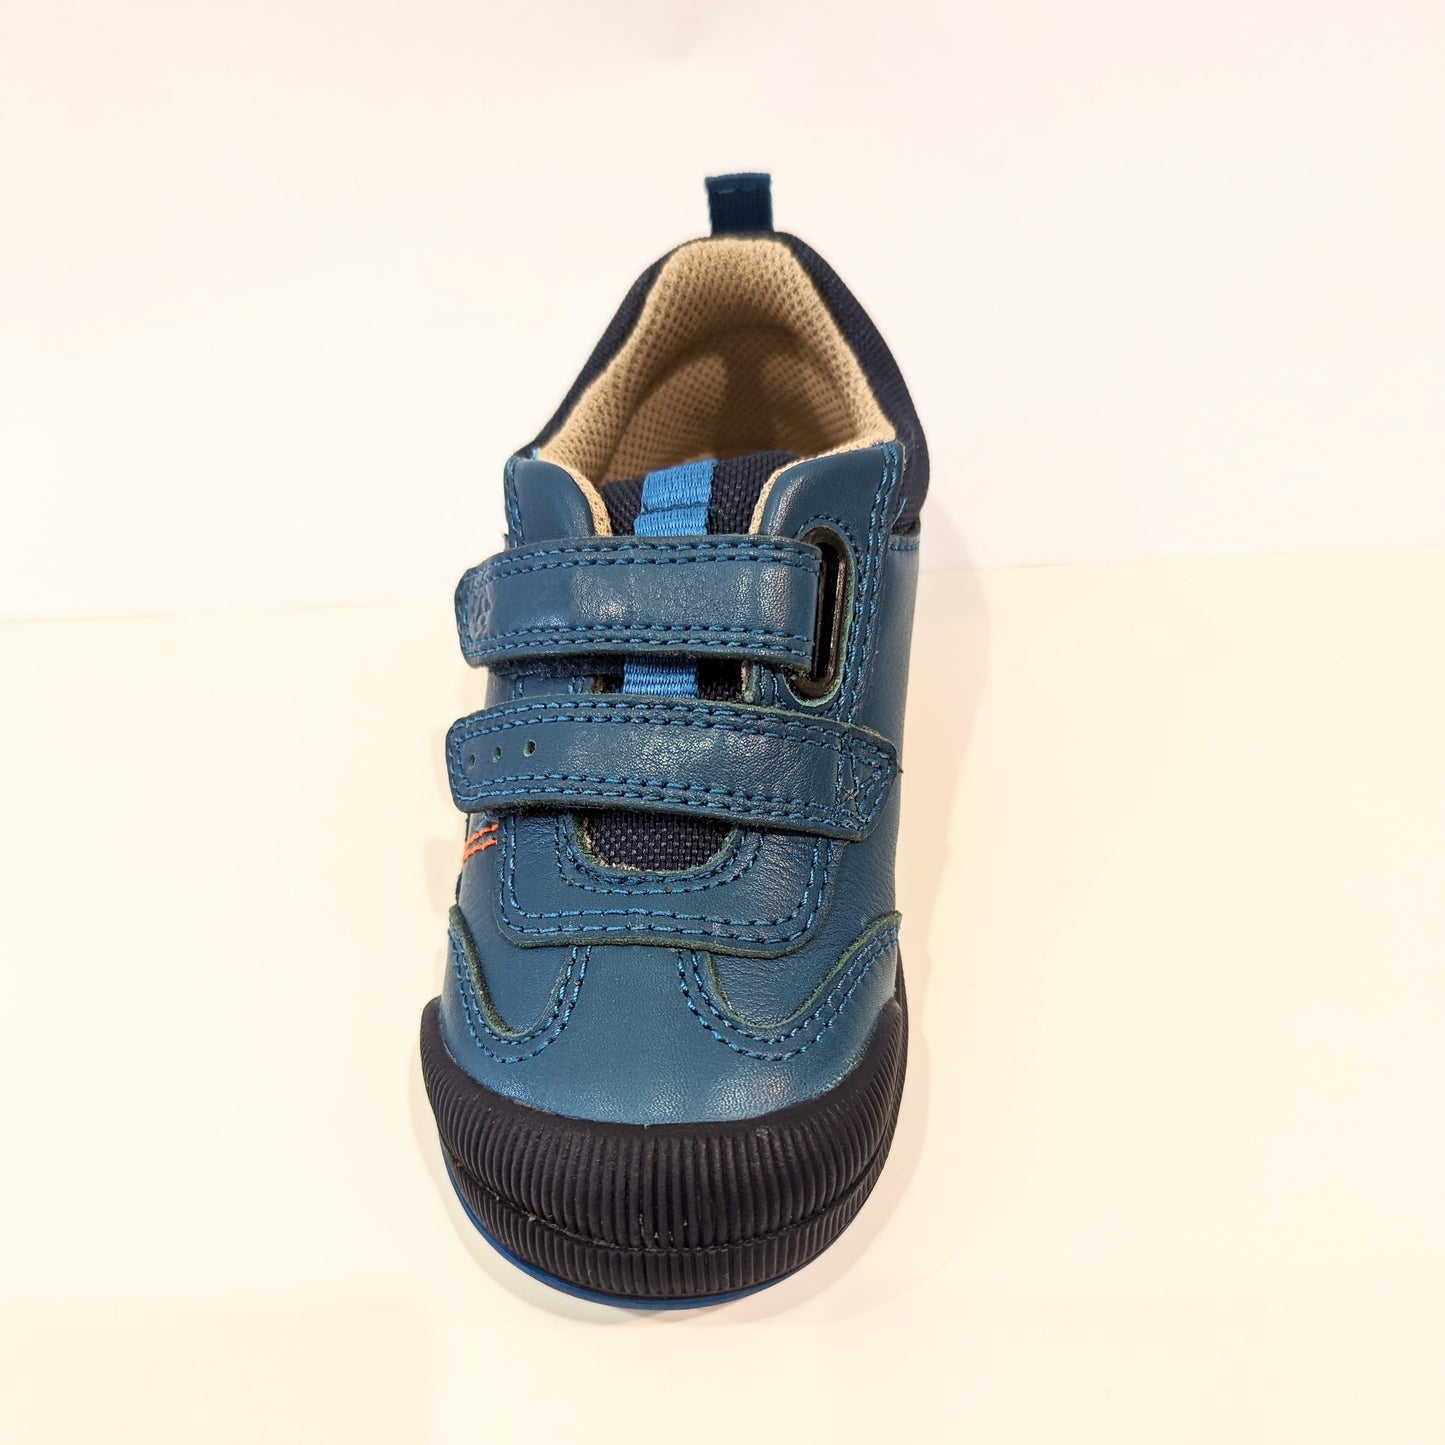 A boys casual shoe by Start Rite, style Tickle, in teal leather with double velcro fastening. Front view.